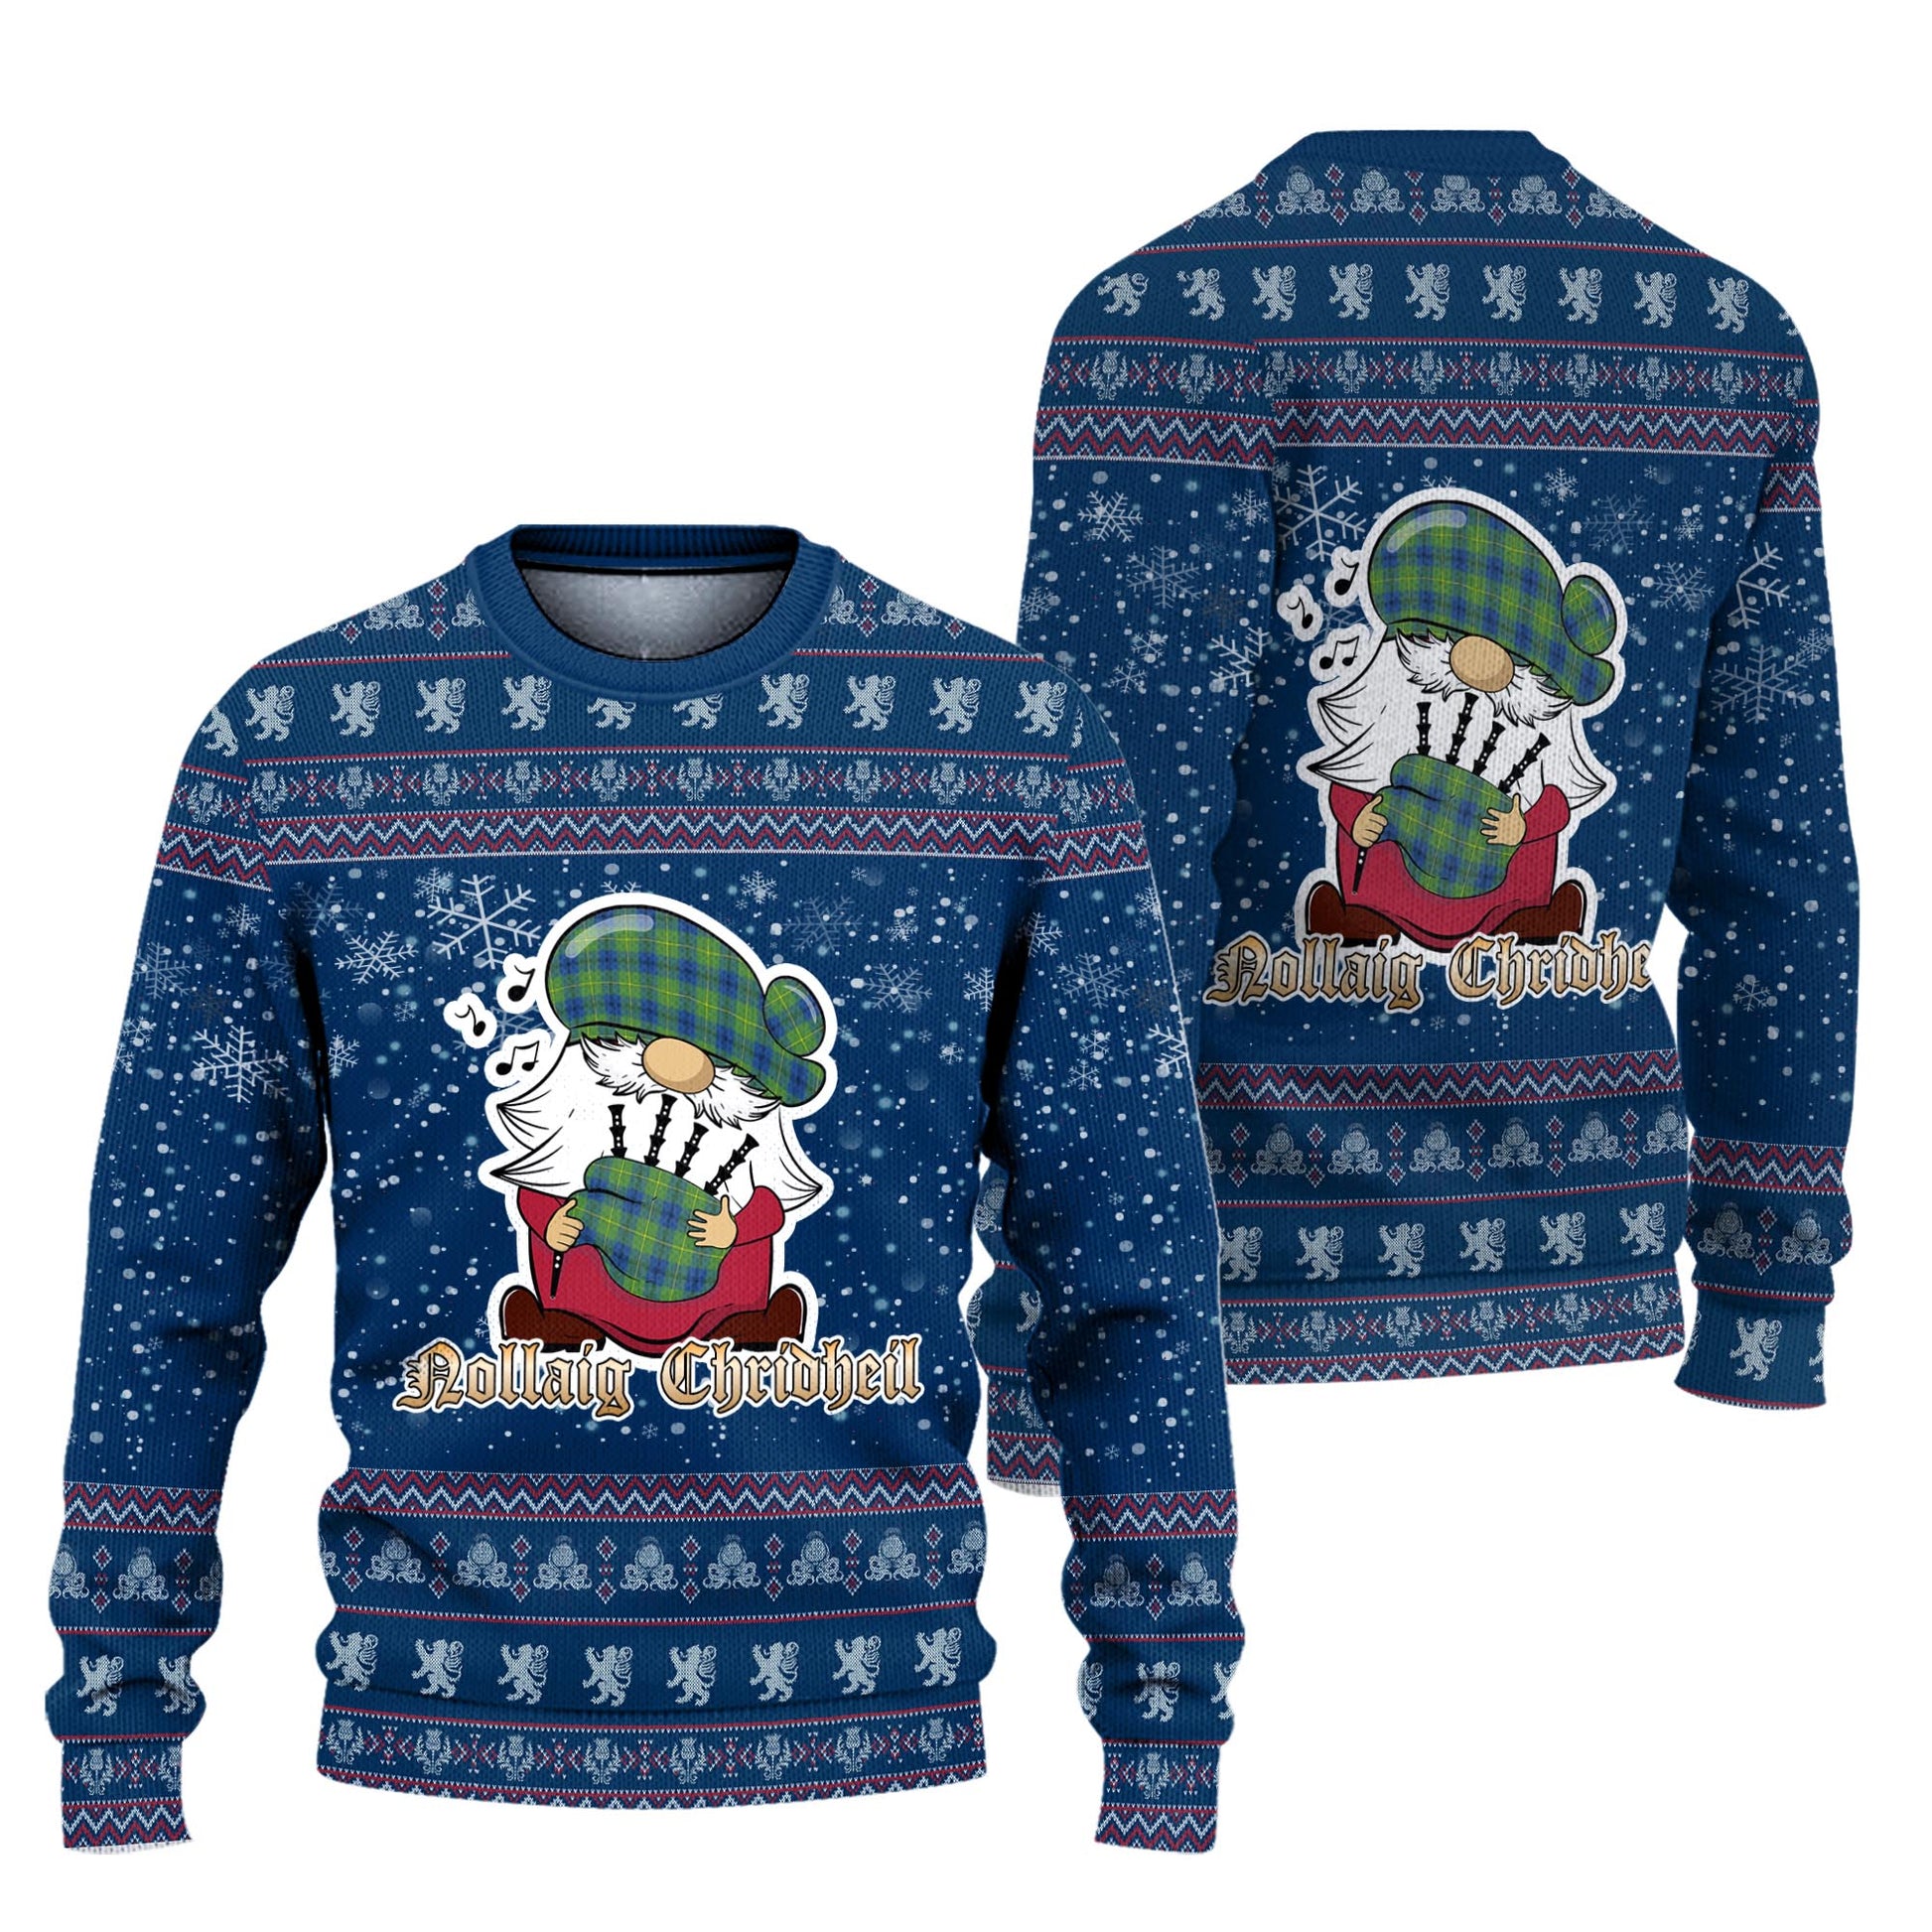 Johnstone-Johnston Ancient Clan Christmas Family Knitted Sweater with Funny Gnome Playing Bagpipes Unisex Blue - Tartanvibesclothing